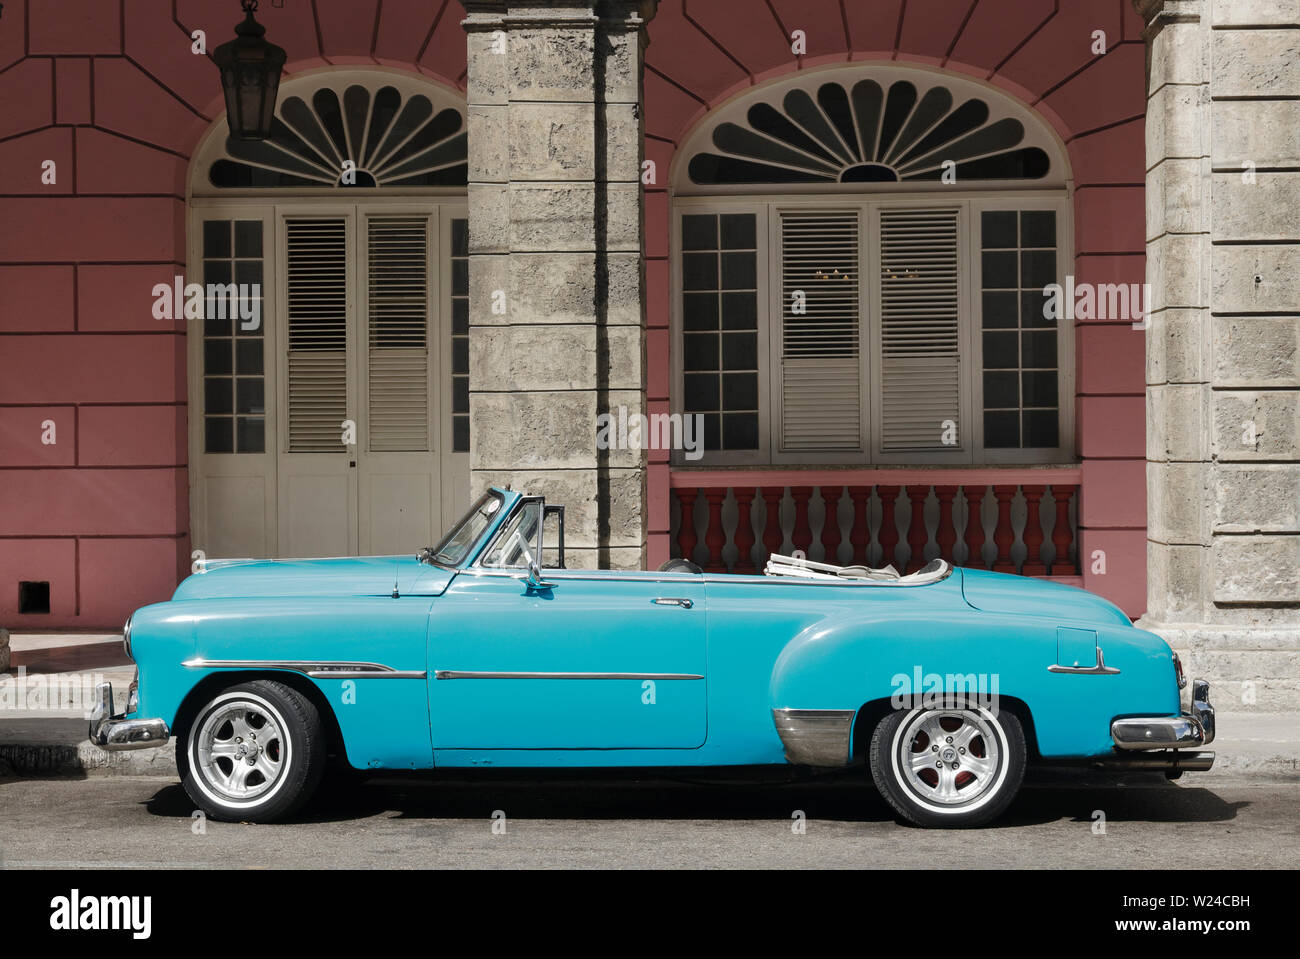 Classic American car parked on the street in Havana, Cuba. Vintage Turquoise Chevy in front of building. Stock Photo